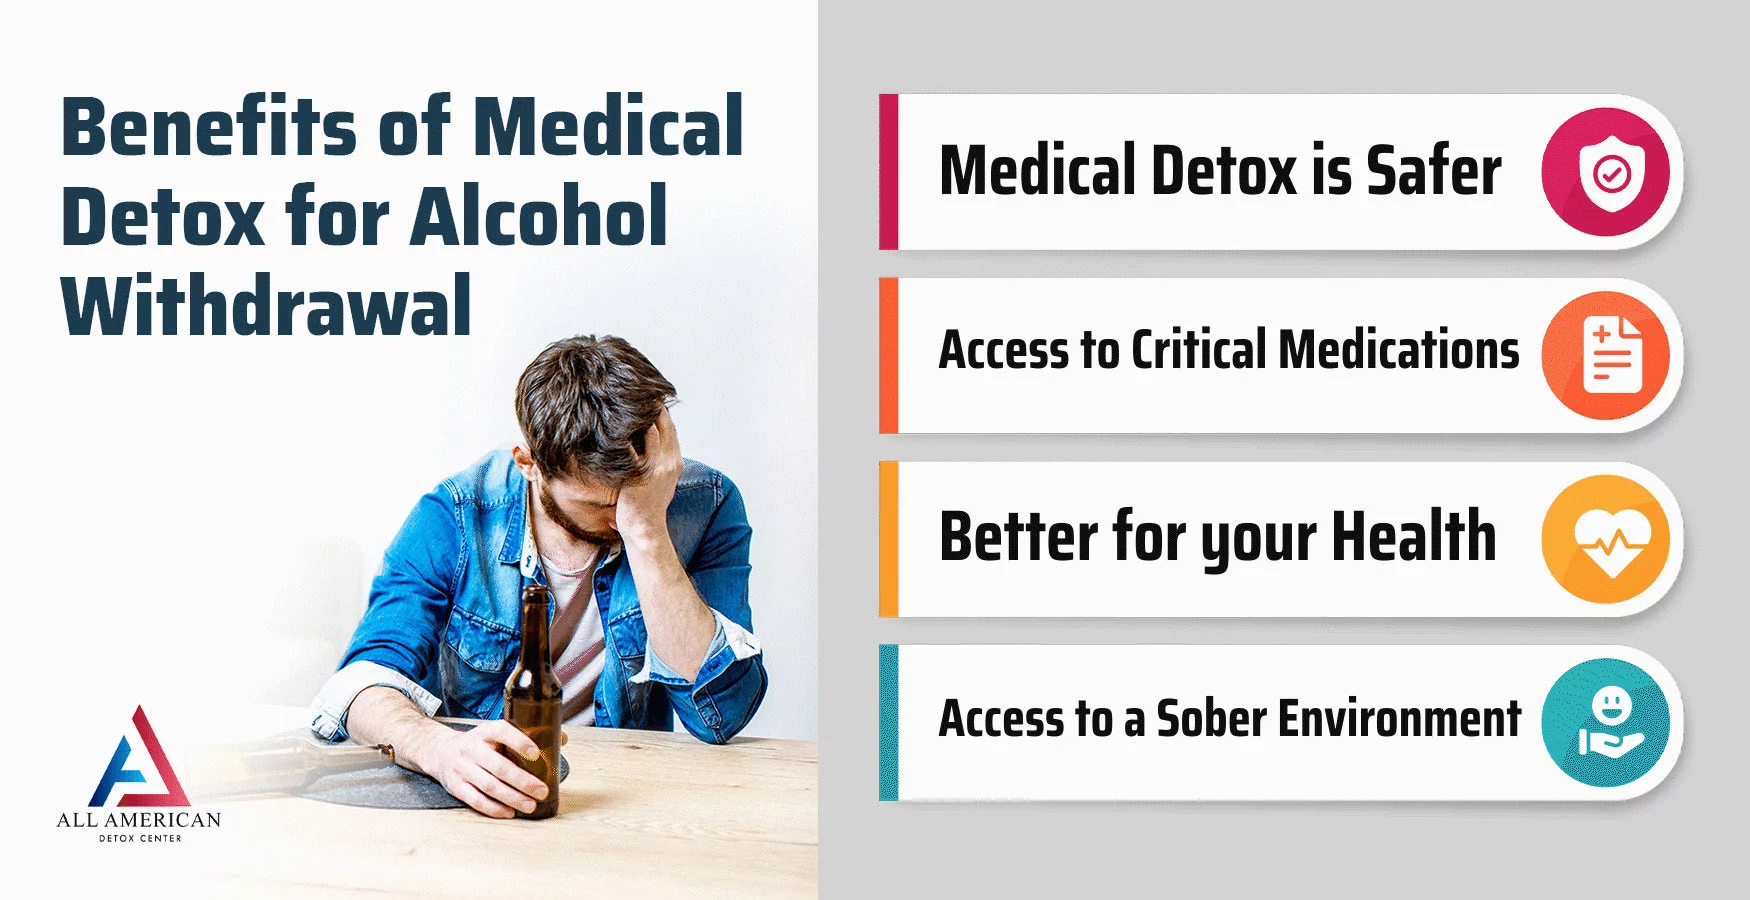 Benefits of medical detox for alcohol withdrawl